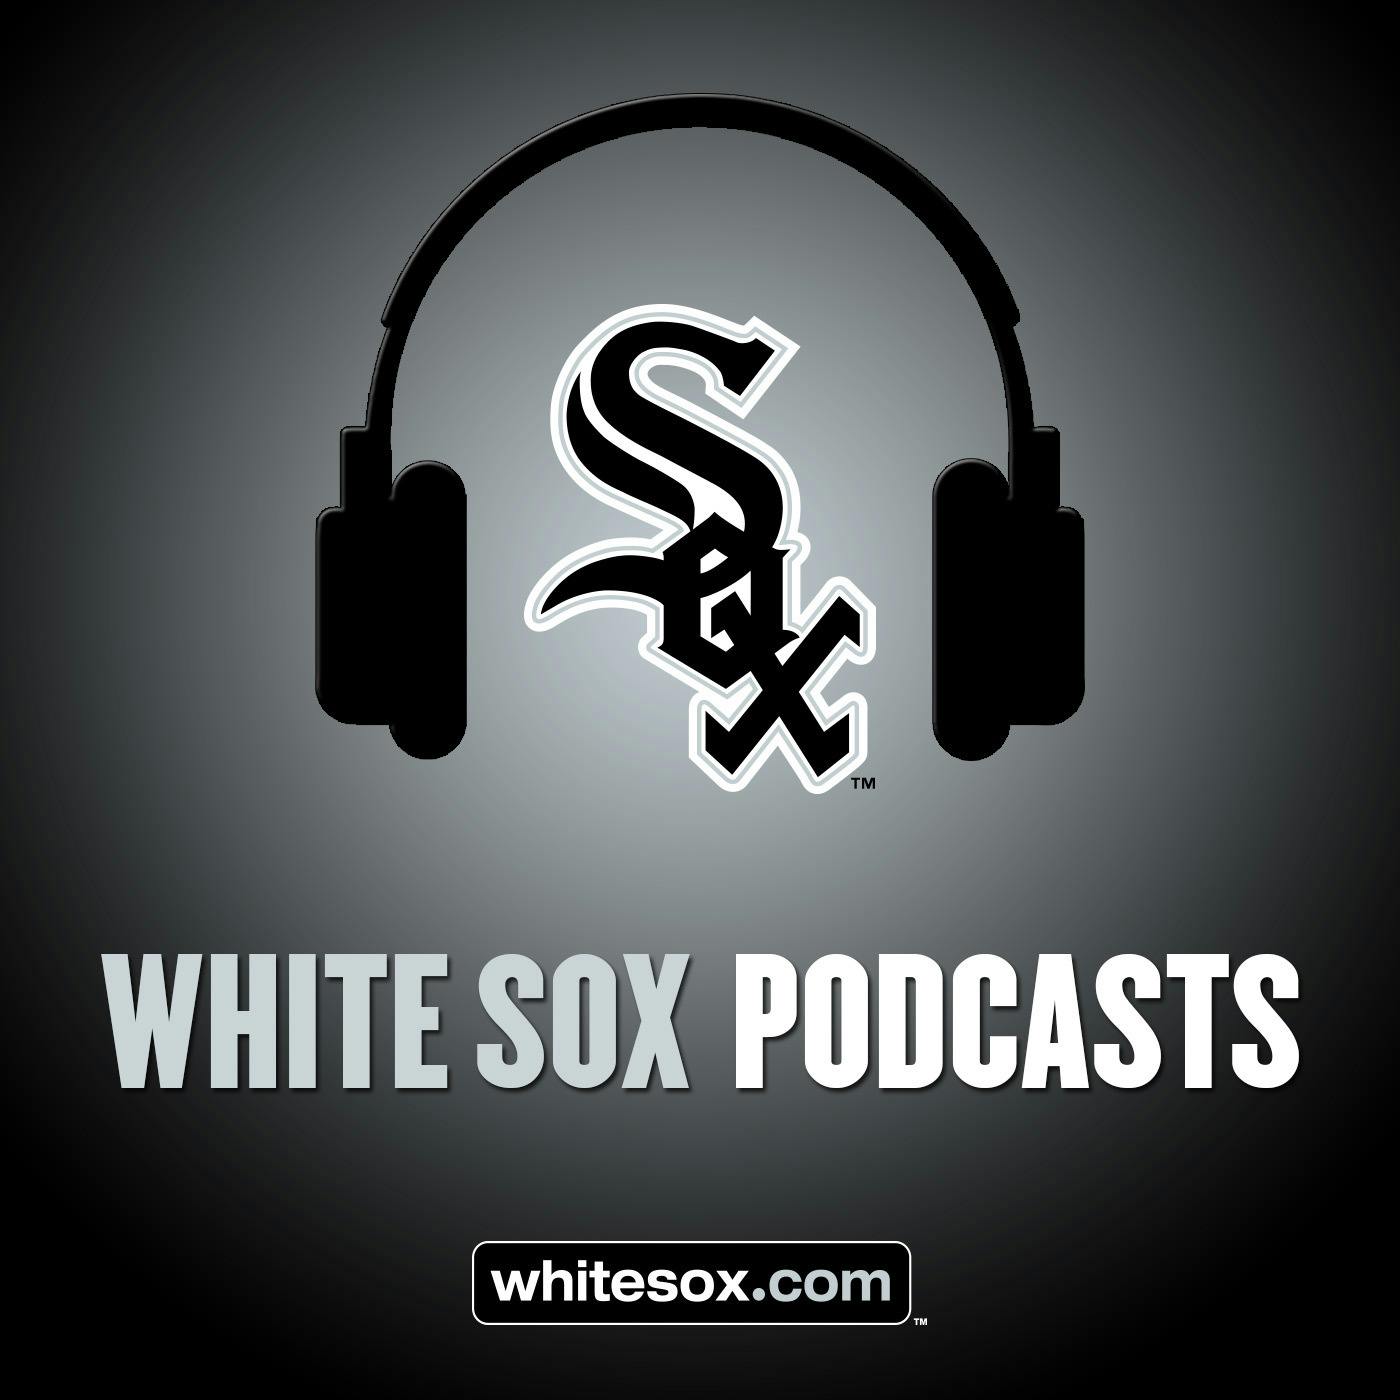 3/10/18: White Sox Weekly